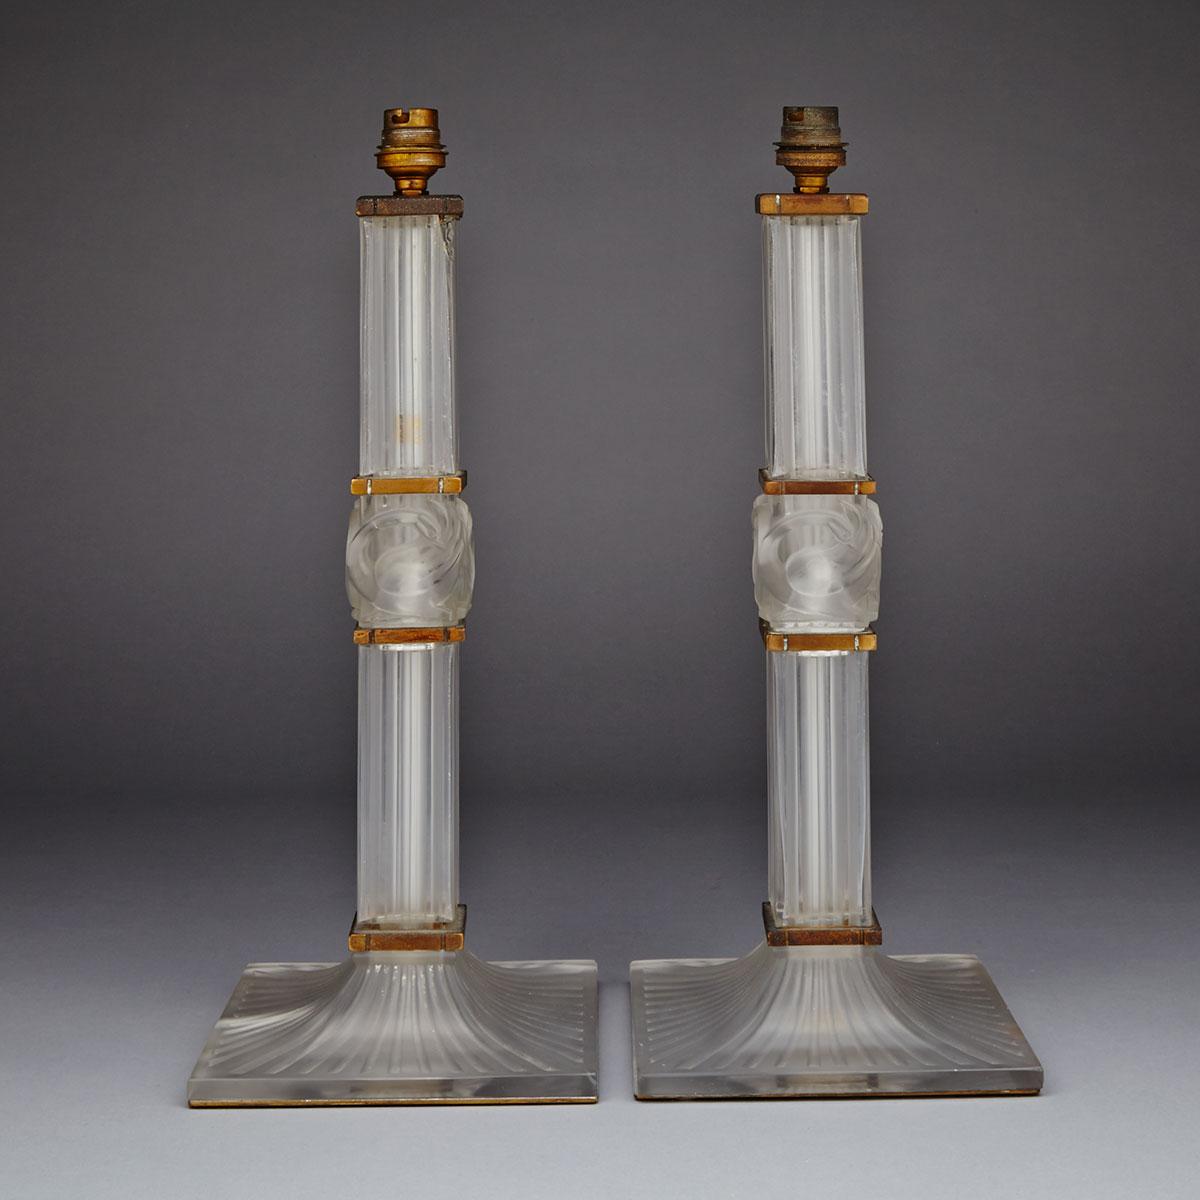 ‘Josephine’, Pair of Gilt Bronze Mounted Lalique Moulded and Frosted Glass Table Lamps, c.1948